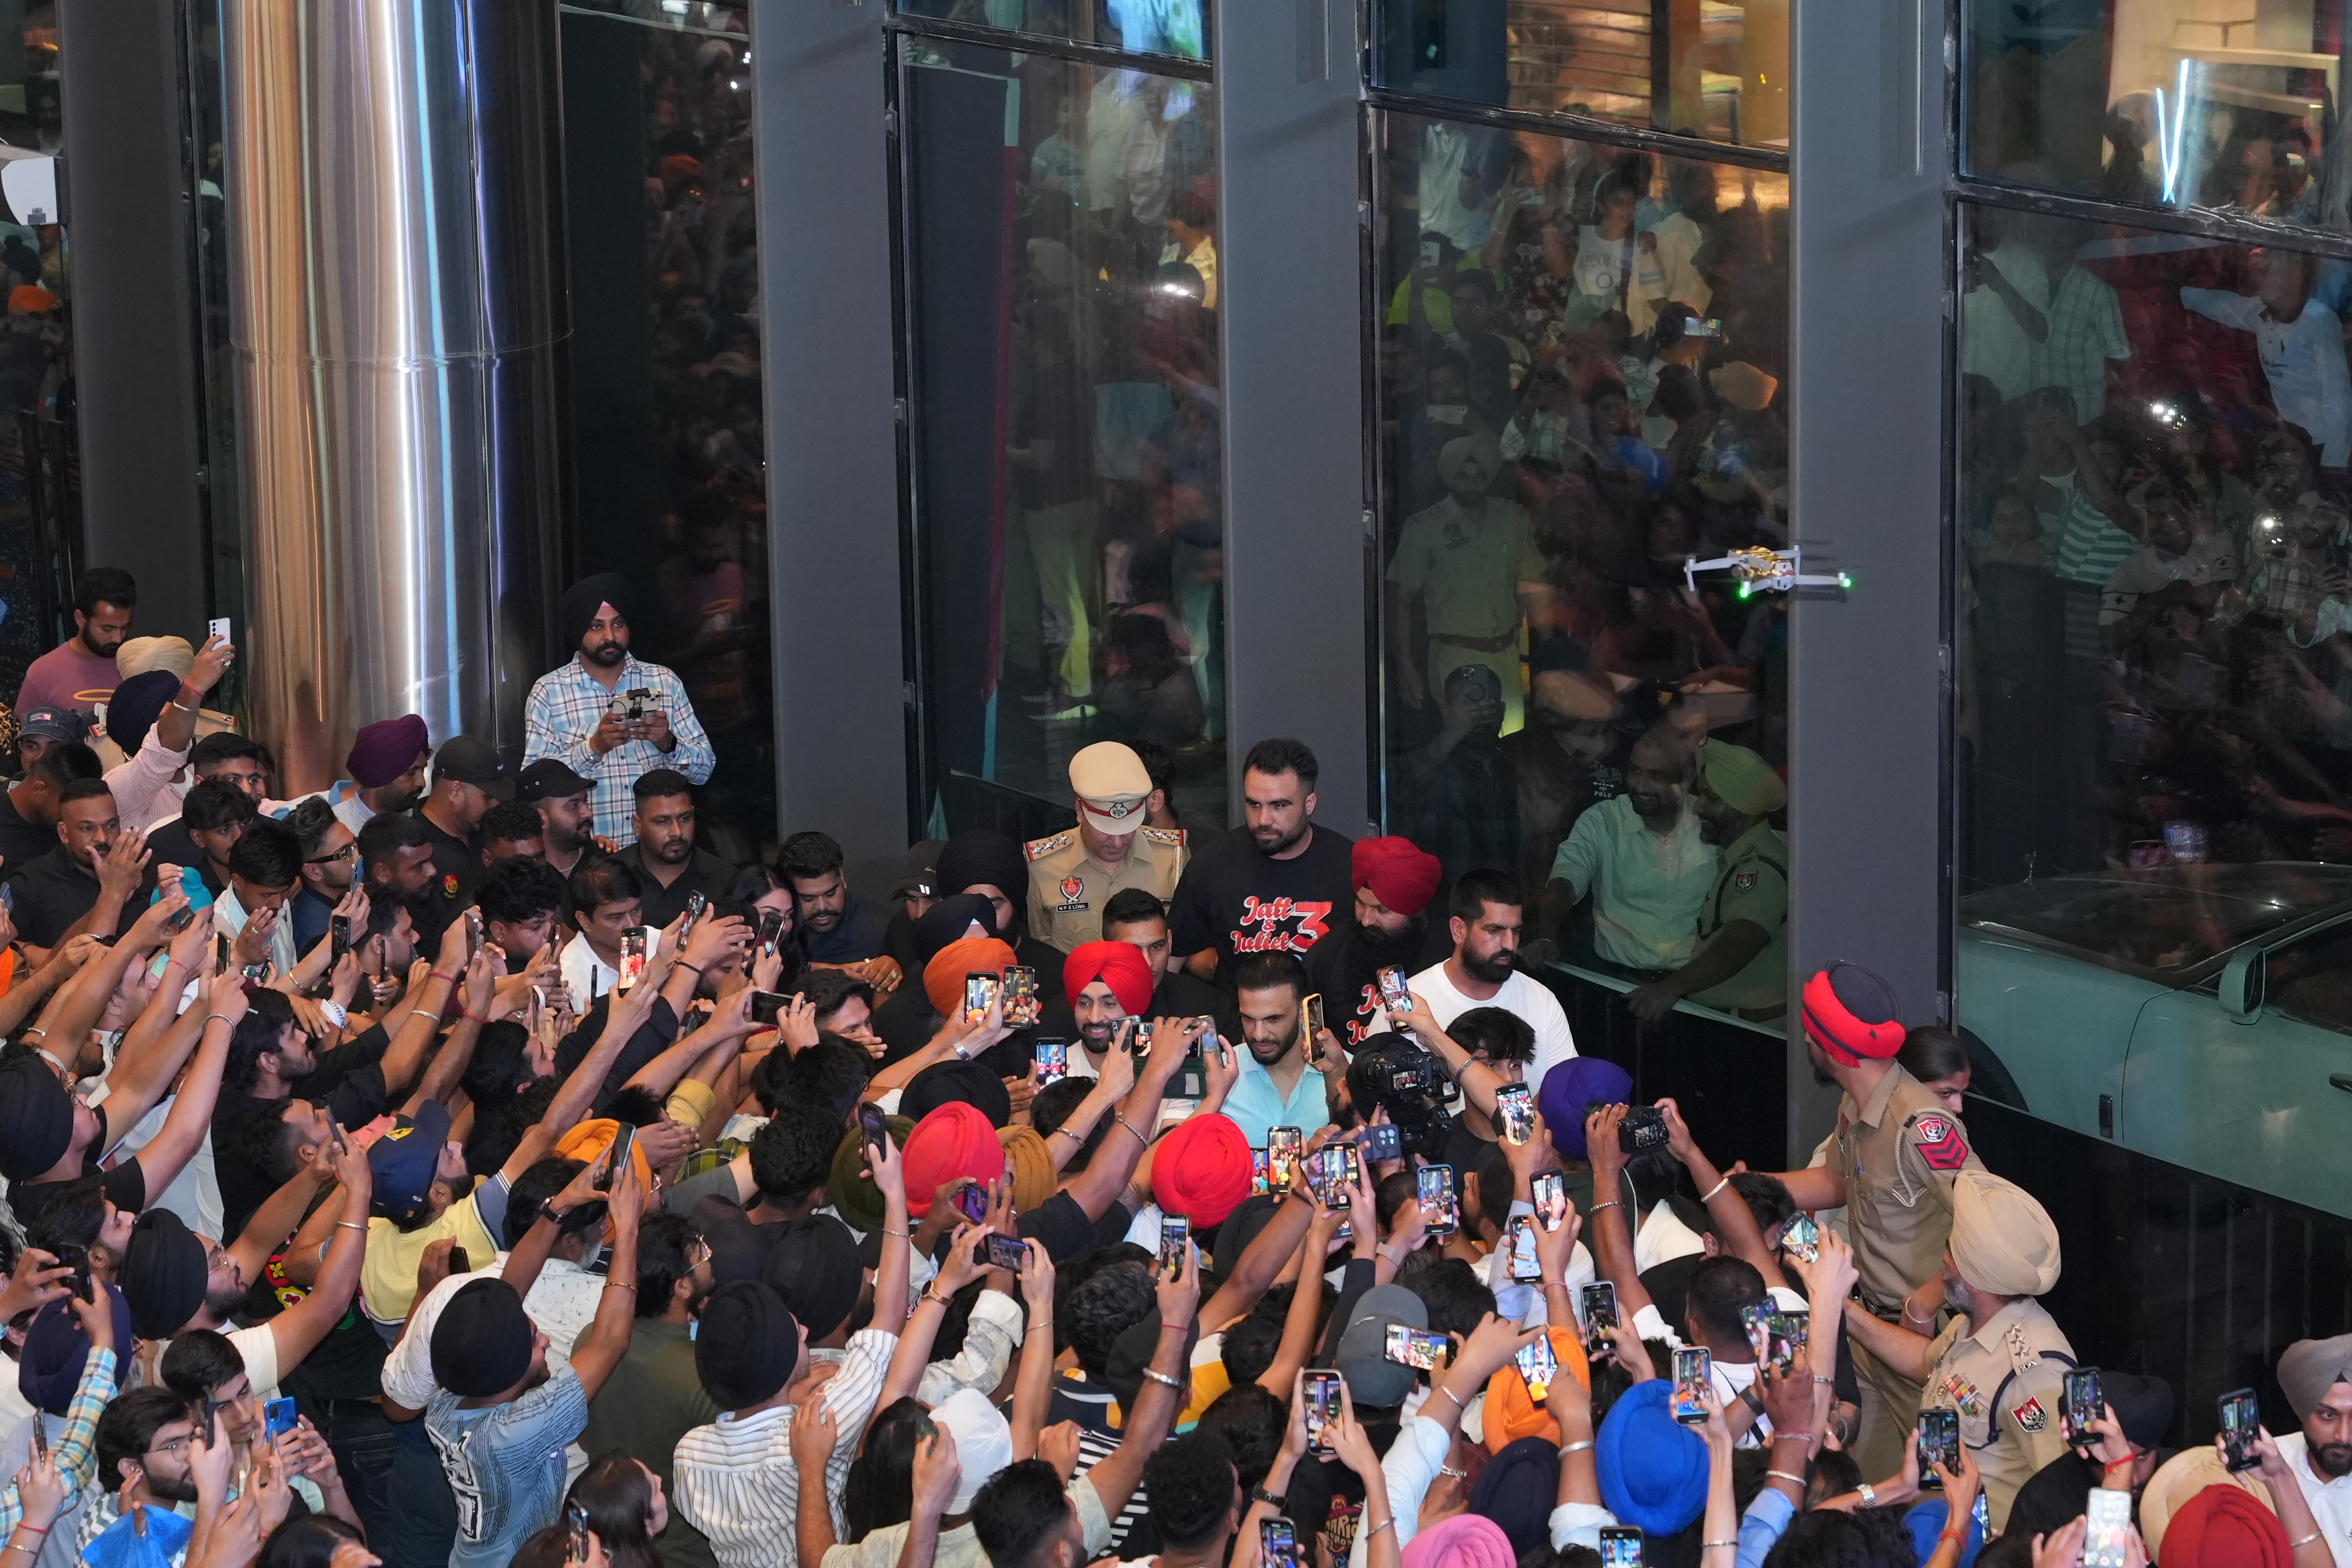 CP67 Mall in Mohali recently witnessed an electrifying event as superstar sensations Diljit Dosanjh and Neeru Bajwa